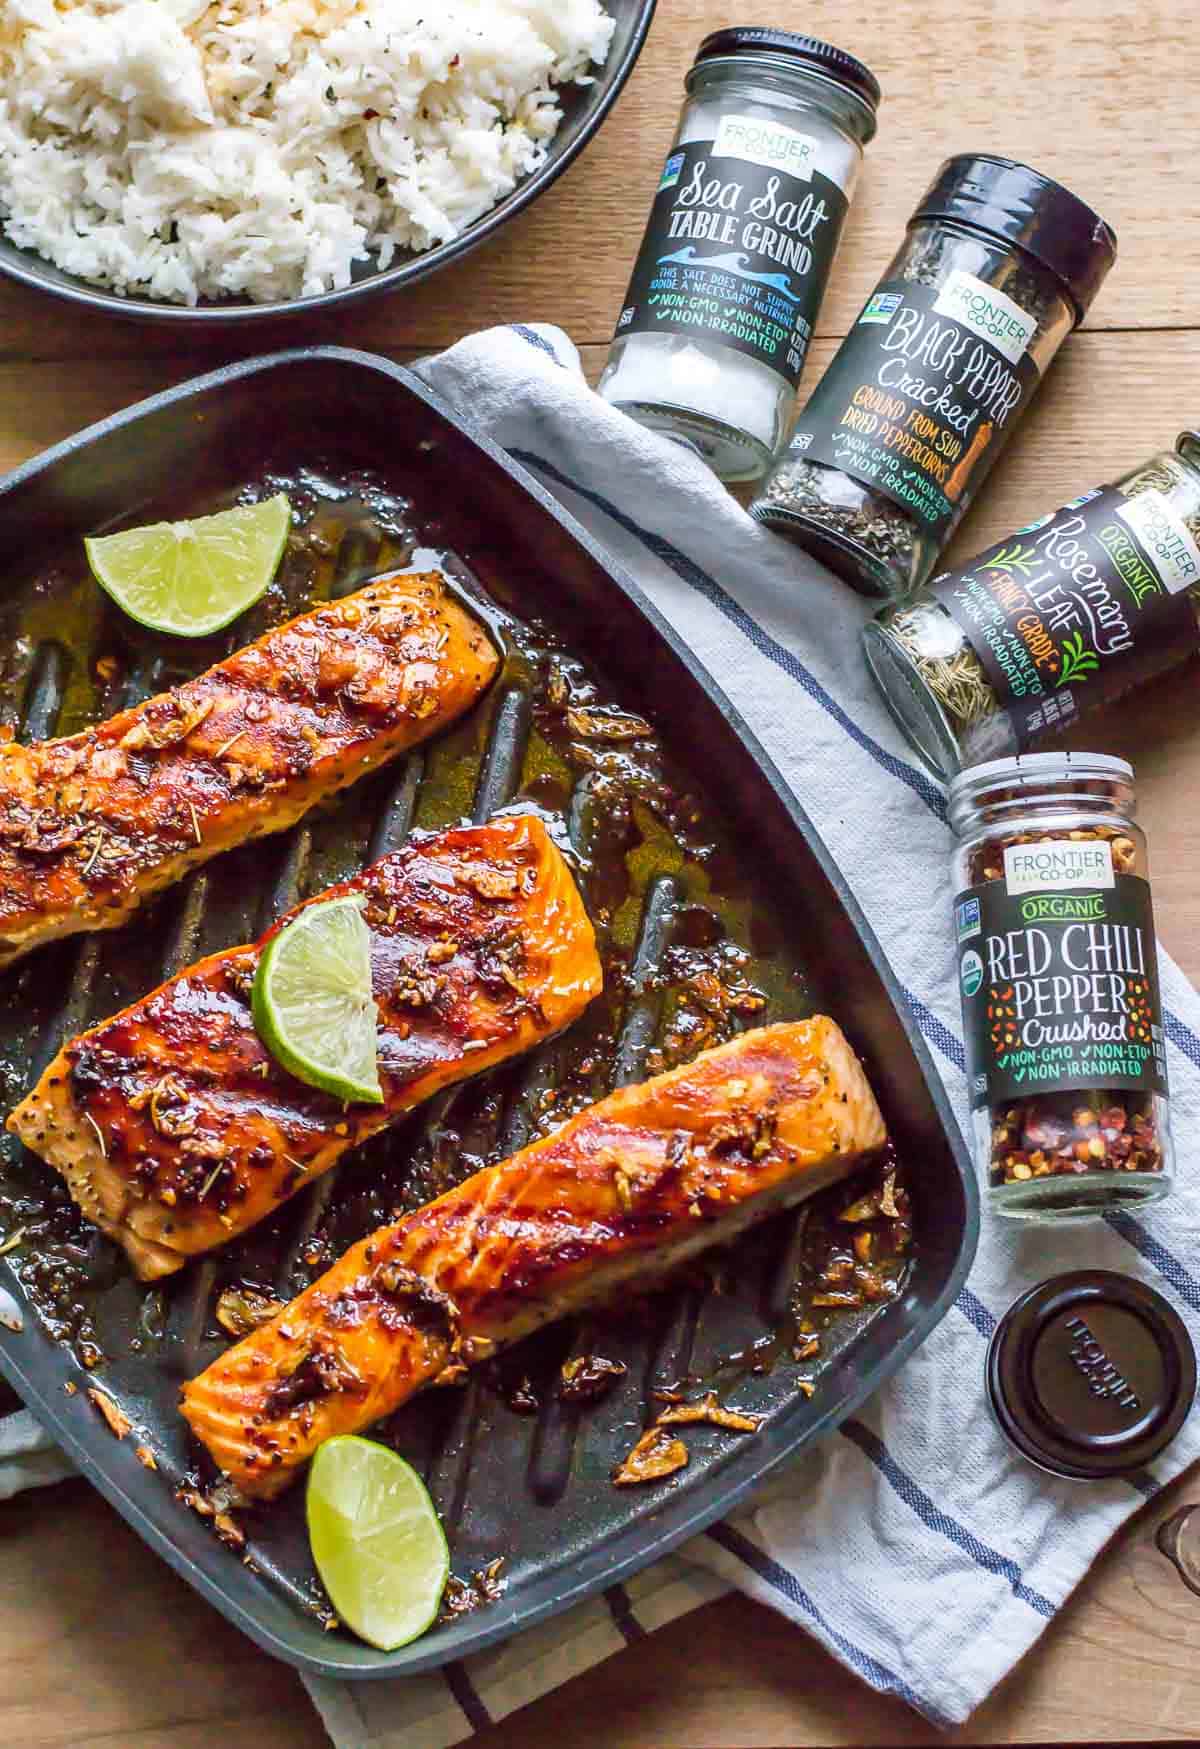 3 pieces of honey garlic salmon topped with lime slices placed on a skillet with rice and spice bottles on the side. 